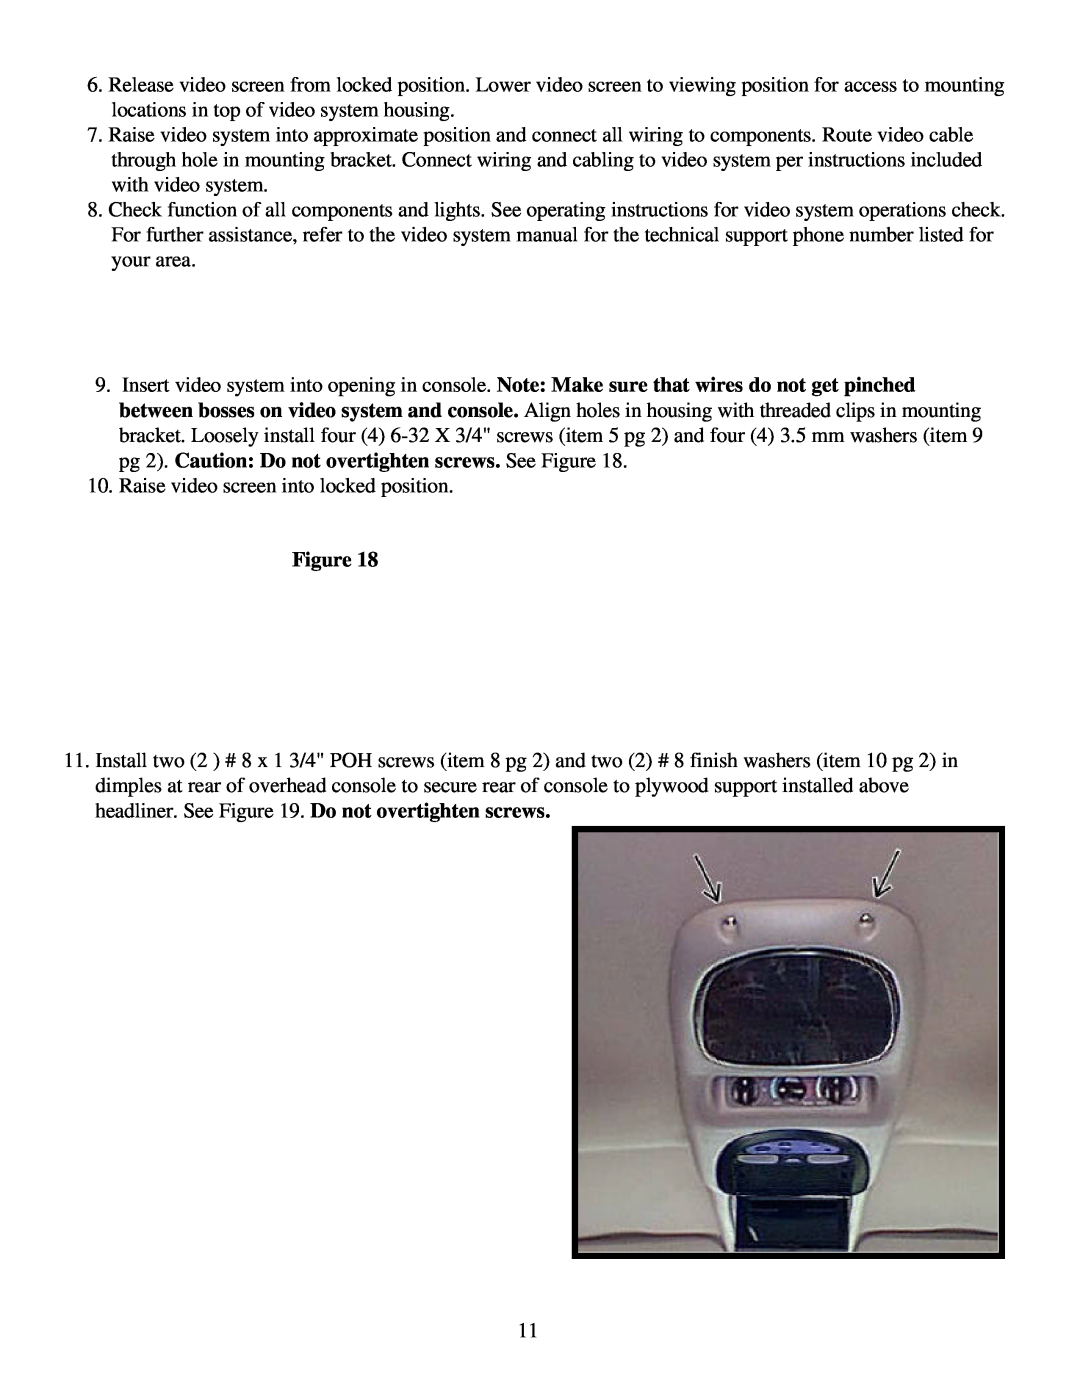 Carson Optical 1181281, 1181280 installation instructions Raise video screen into locked position 